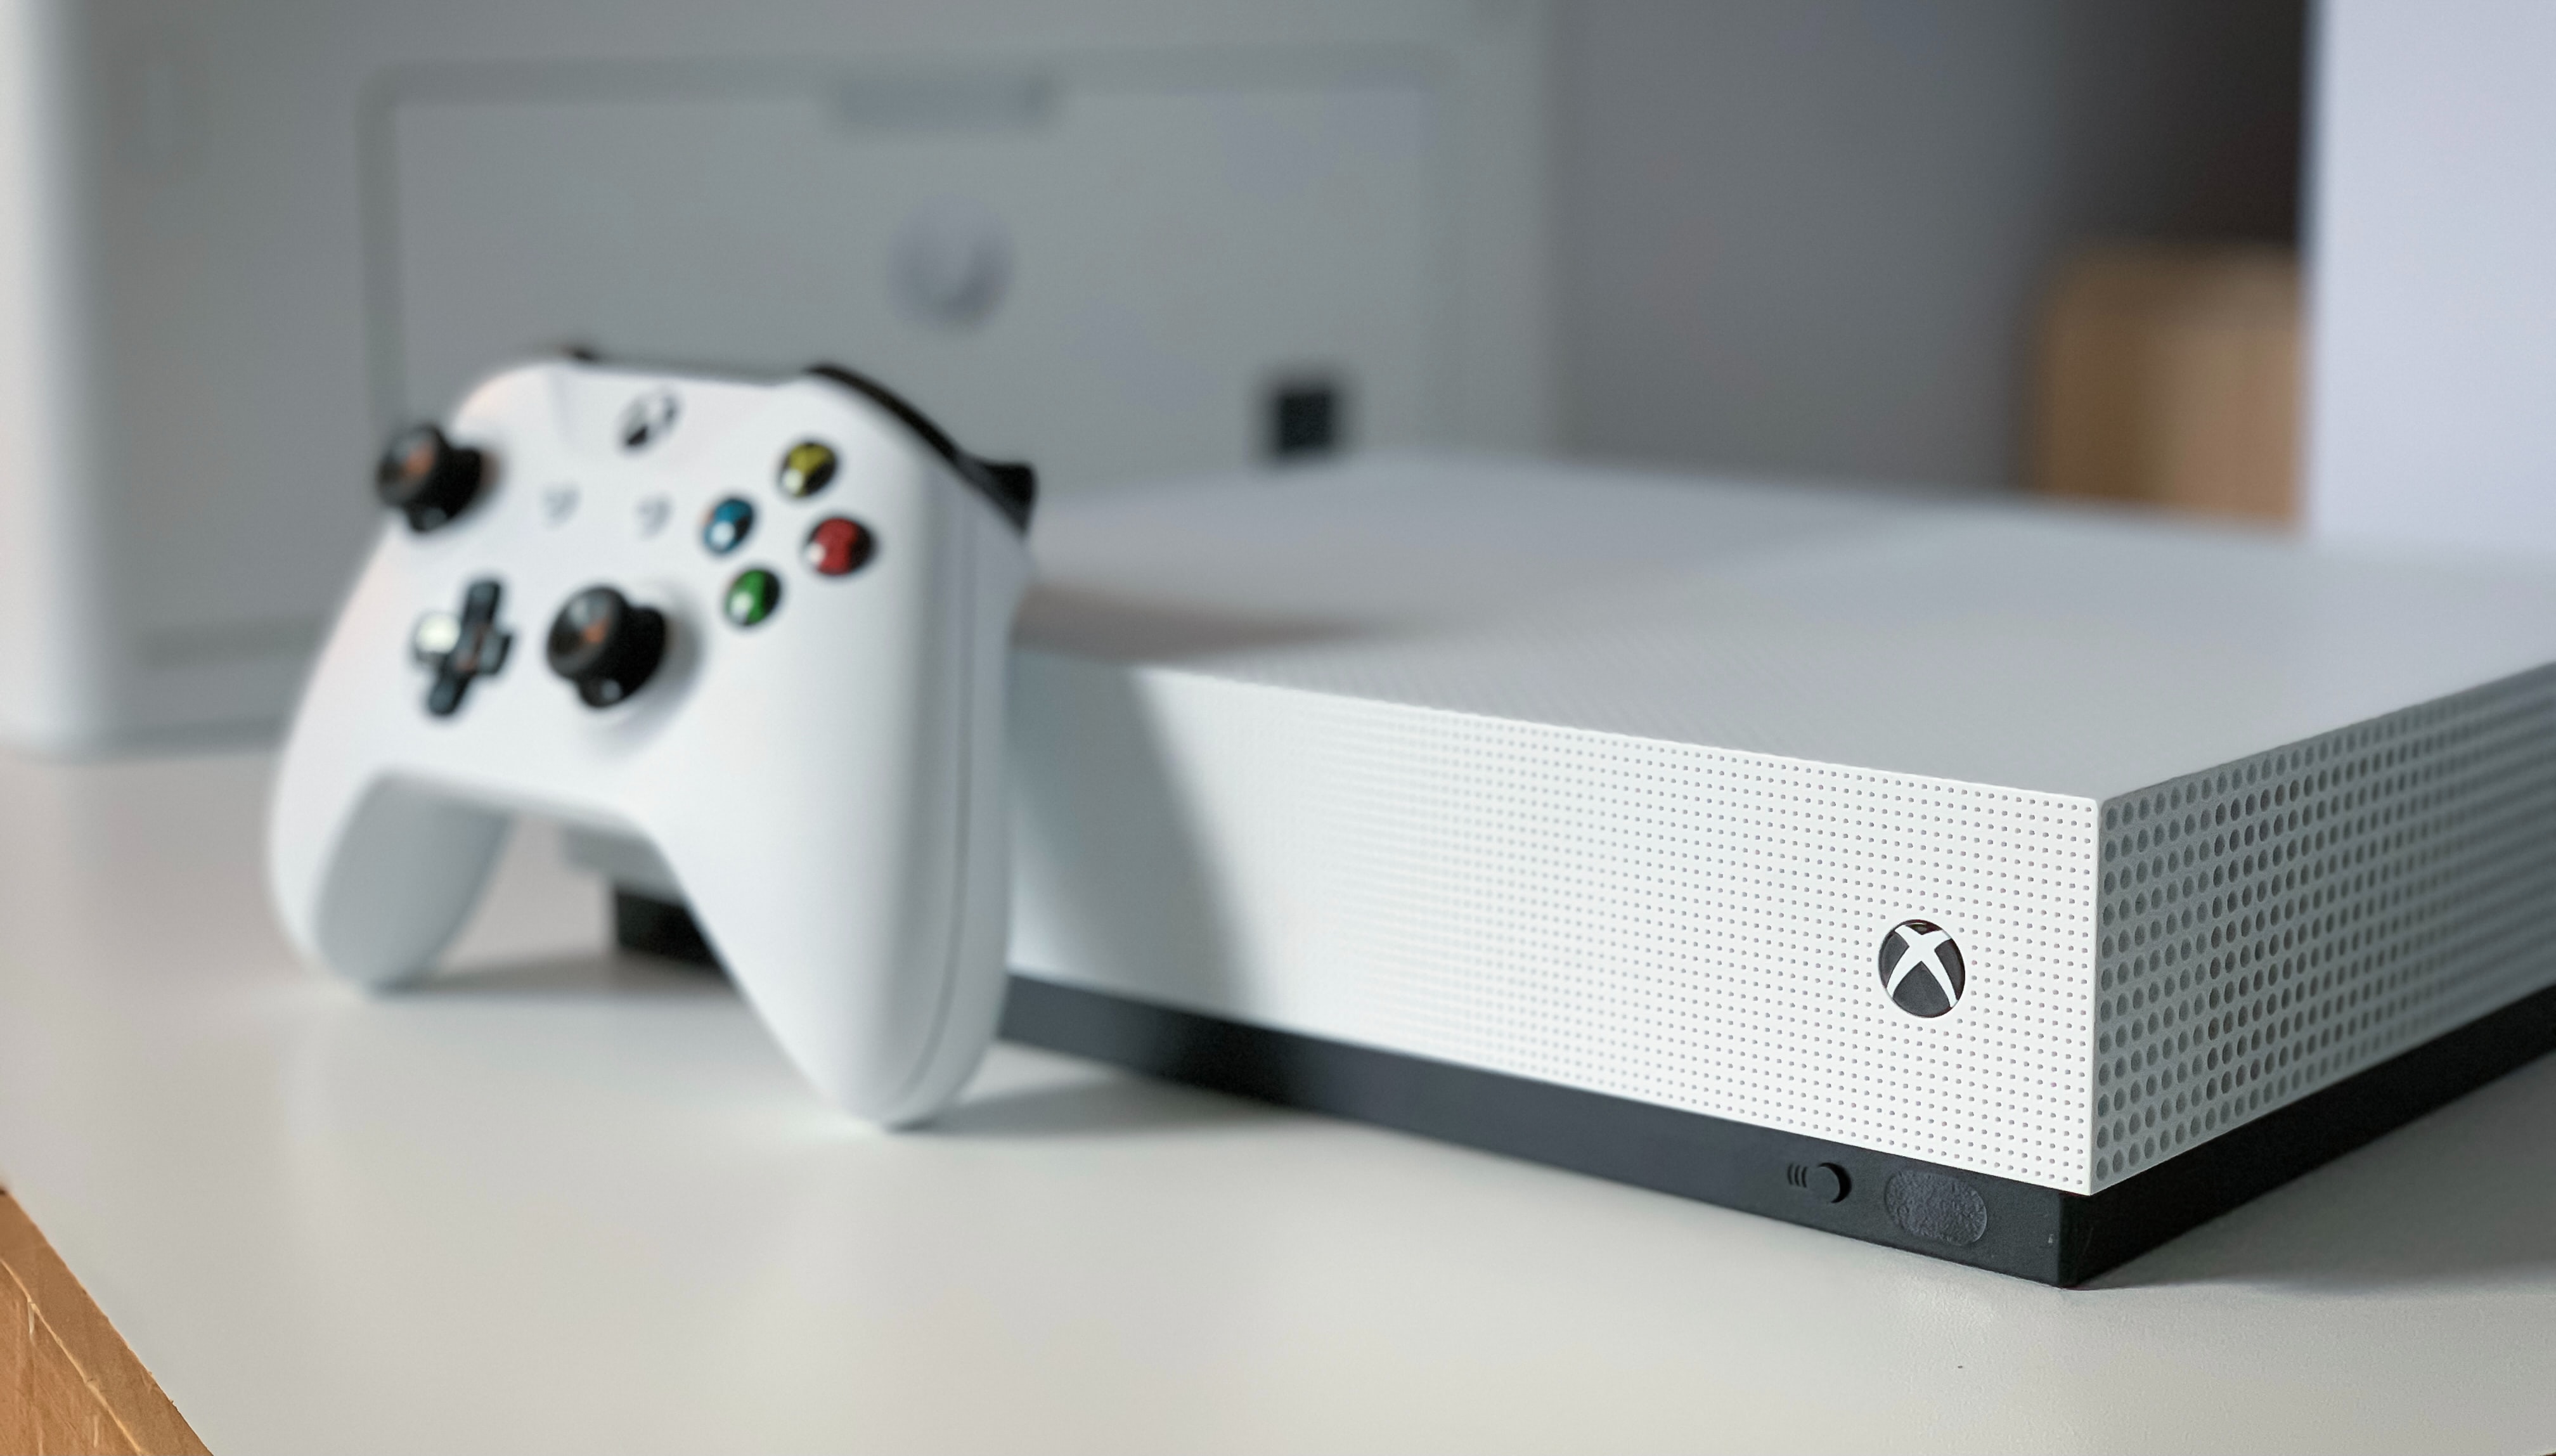 Microsoft Shows New Xbox, Setting Up Holiday 2020 Console Clash - Bloomberg